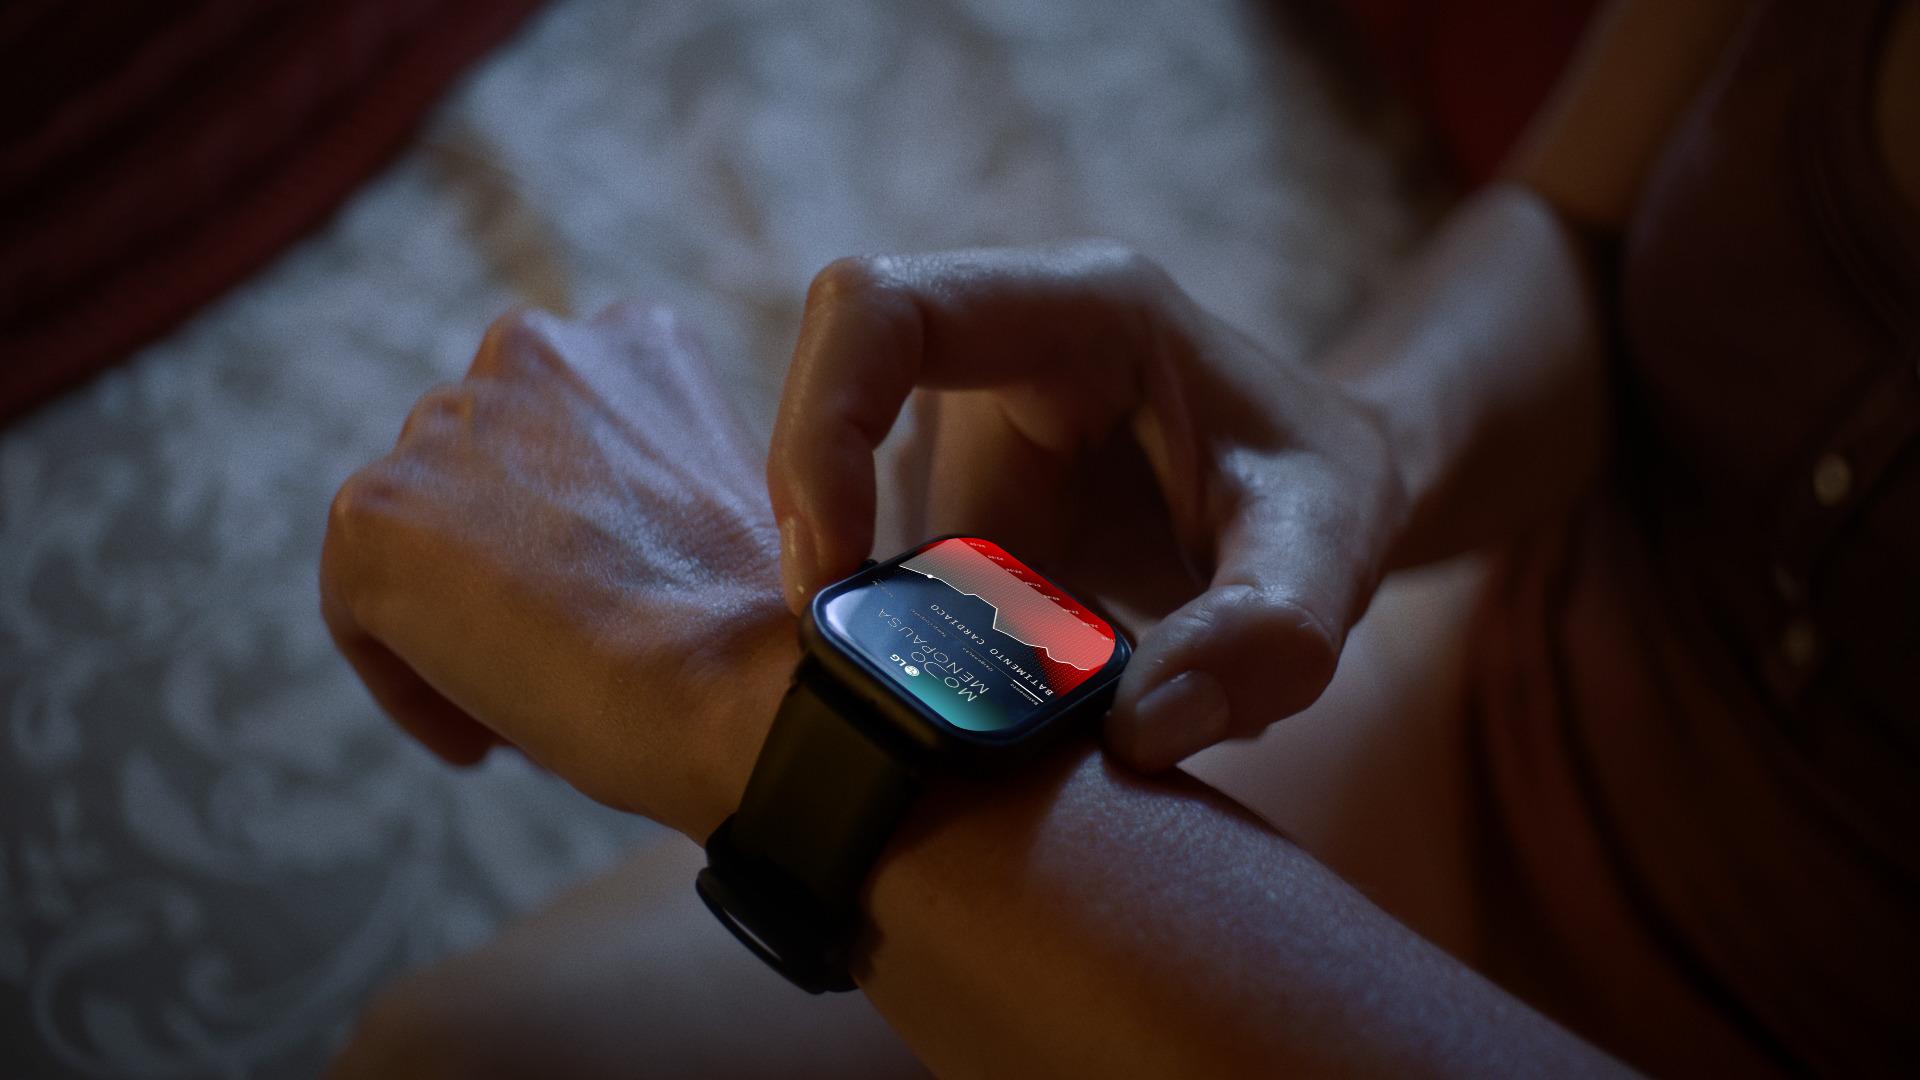 Menopause Mode brings together AI, ThinQ connectivity technology, and smartwatches (Credit: LG/Promotional)